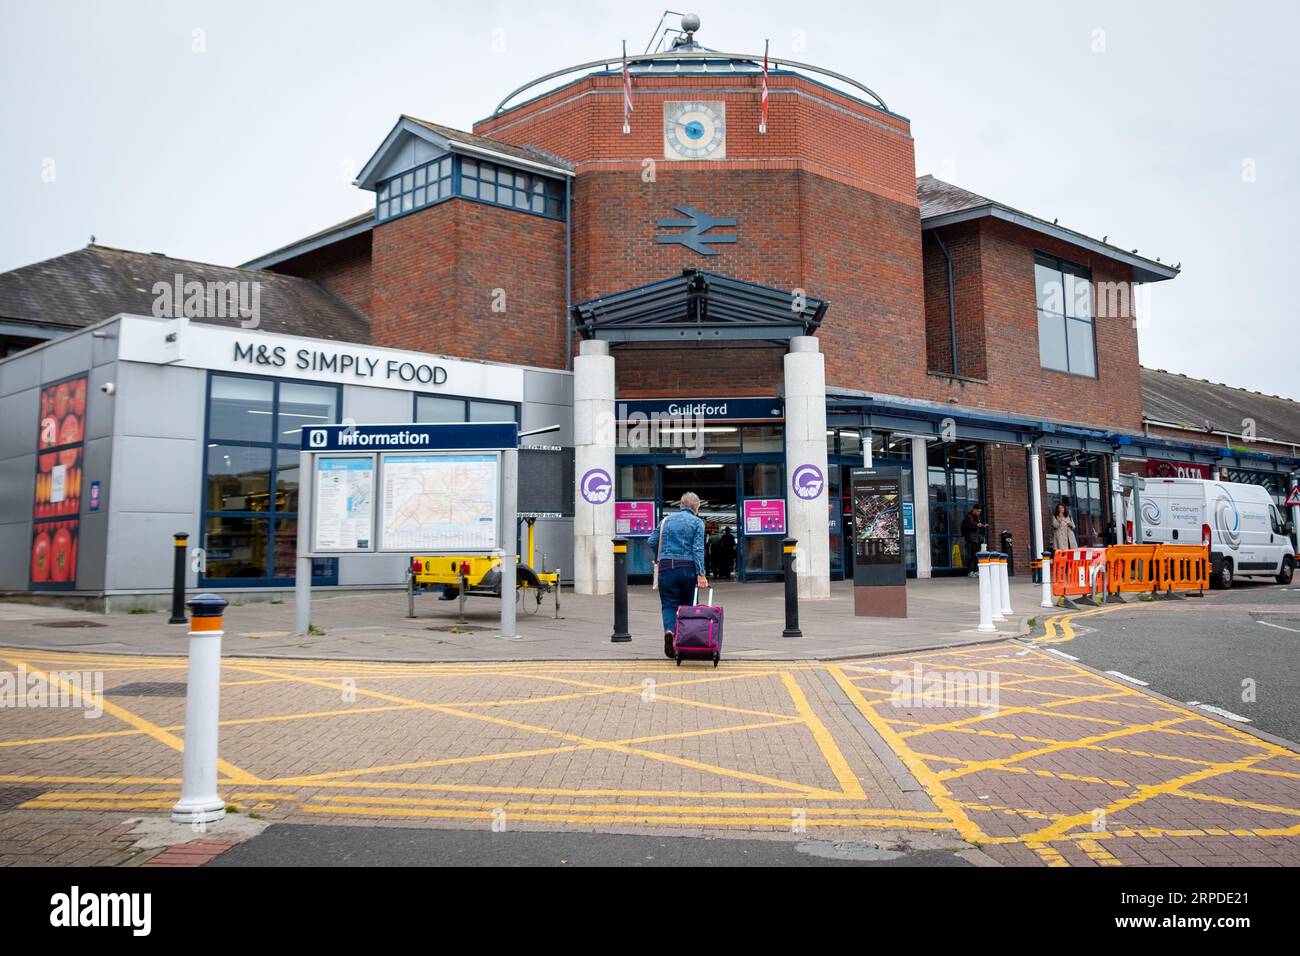 GUILDFORD, SURREY, UK: AUGUST 31, 2023: Guildford Railway Station building- train station on the edge of Guildford town centre Stock Photo